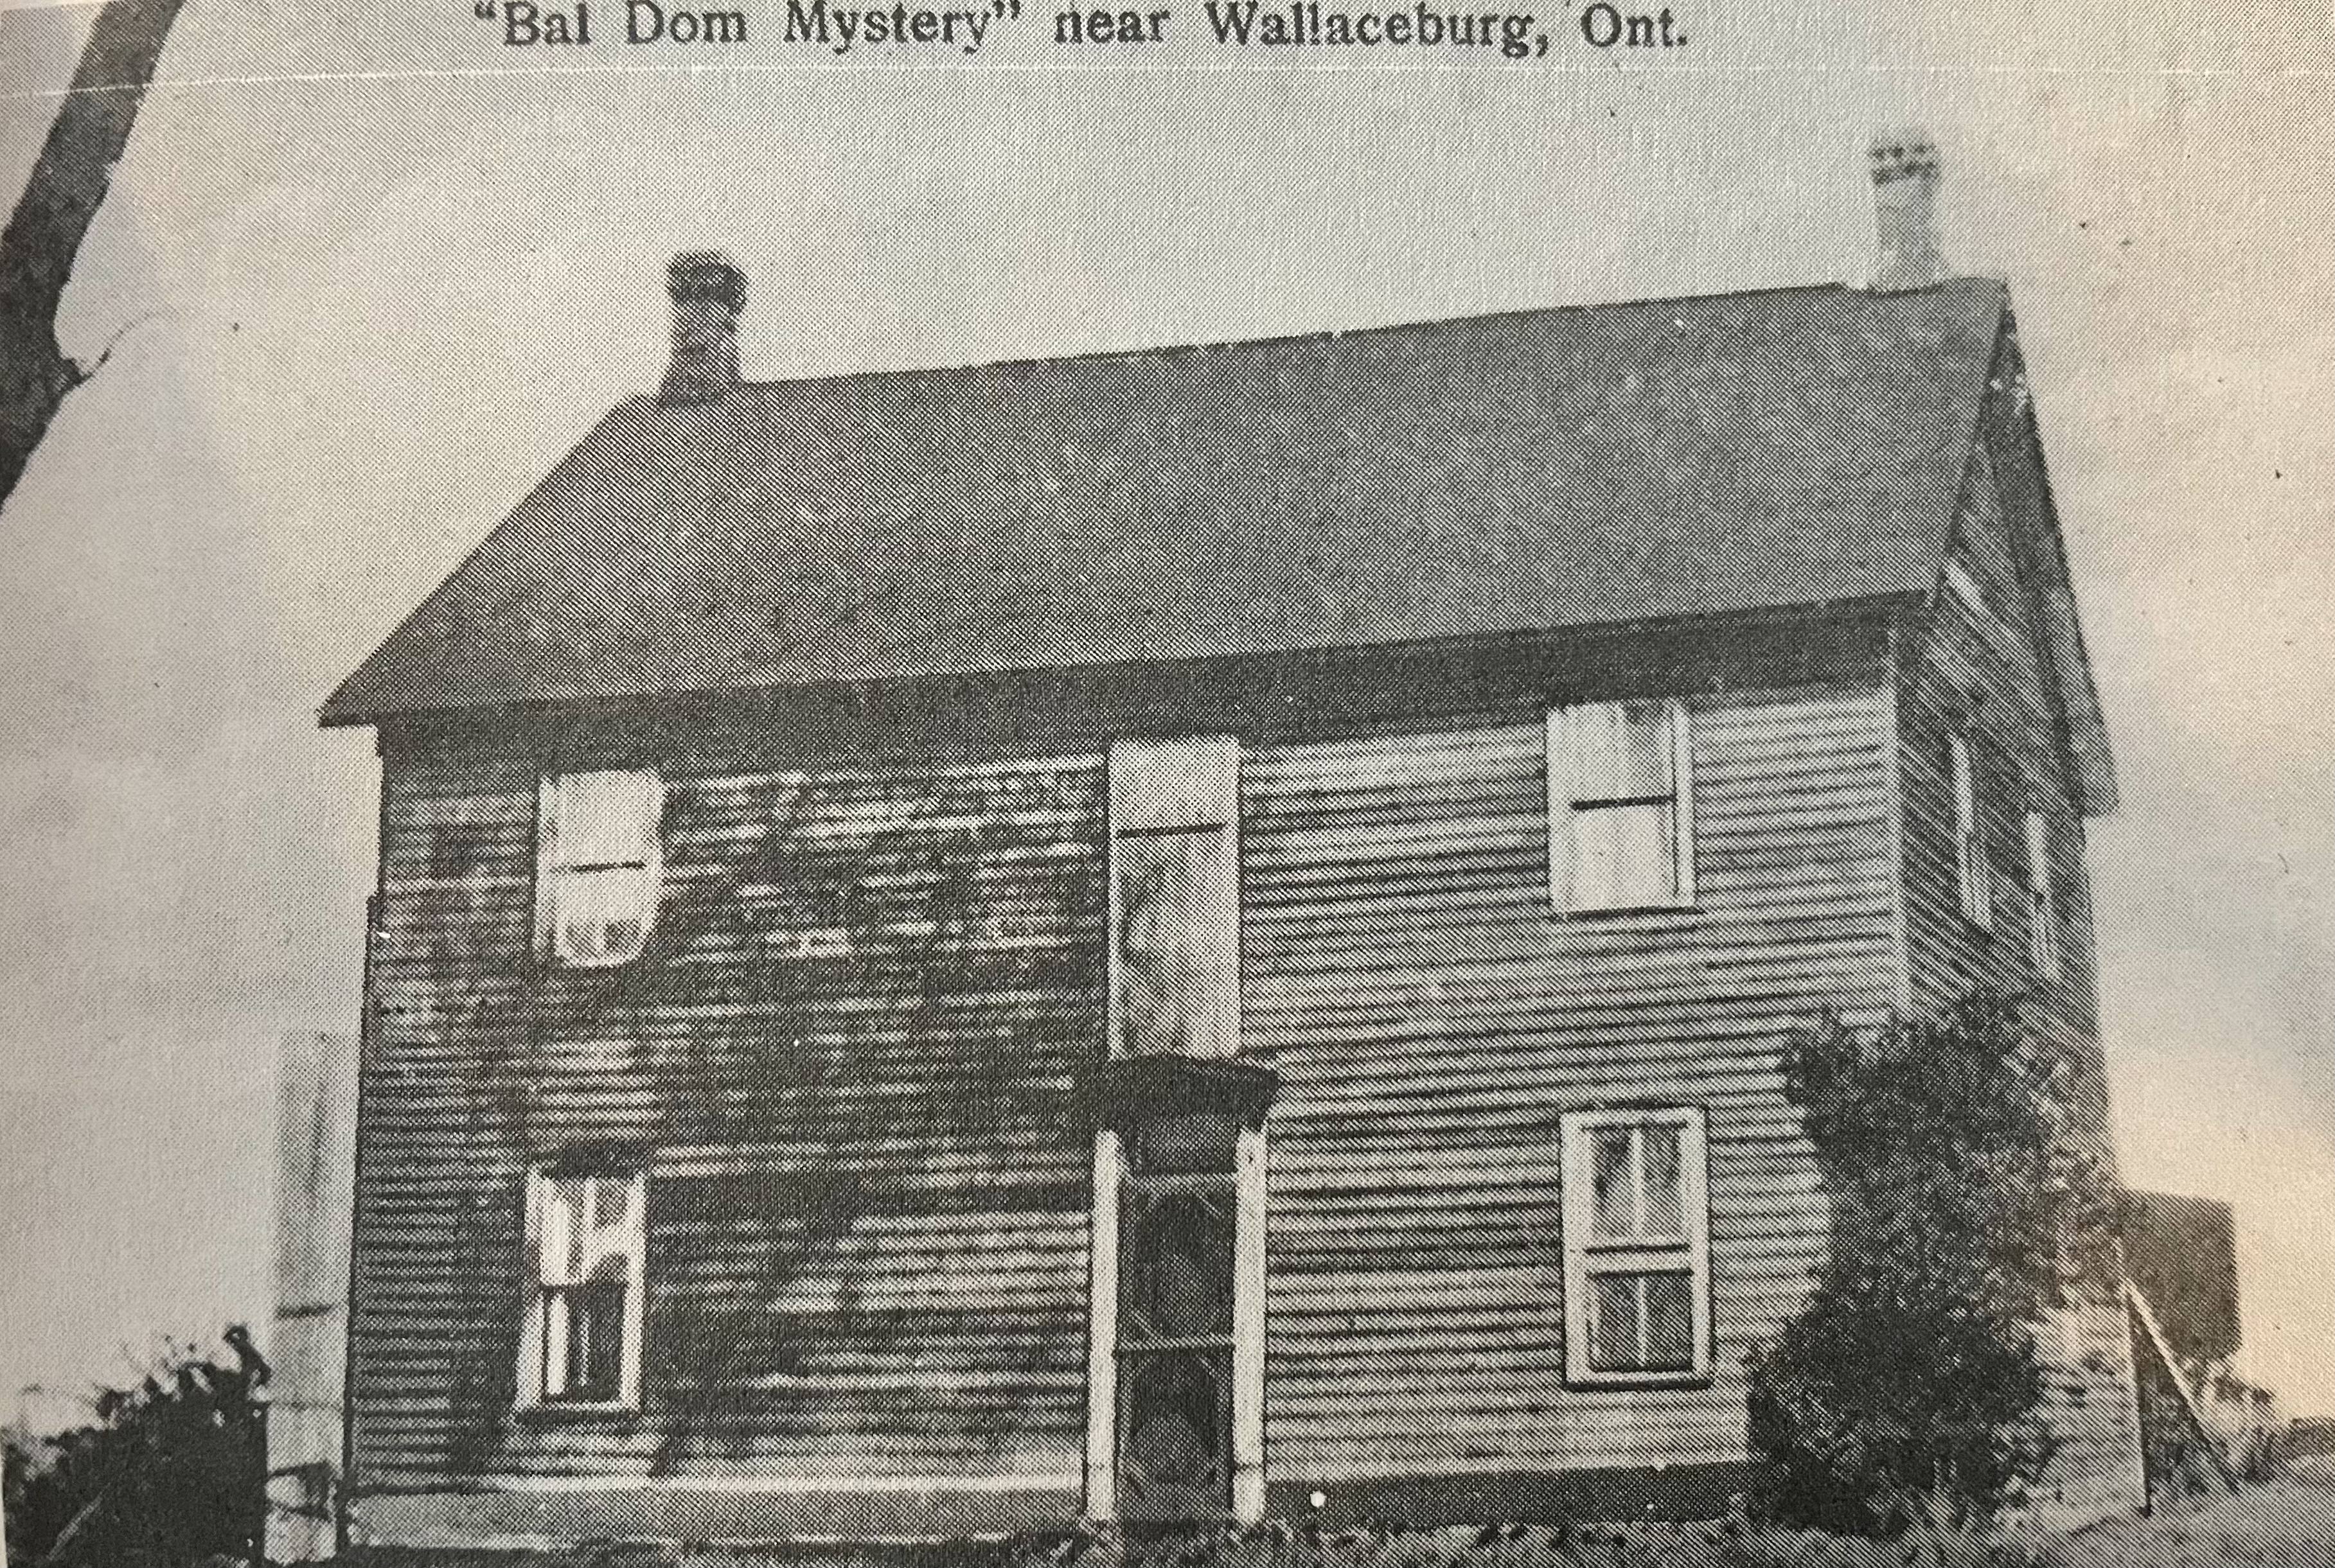 Black and white image of a house with text, "Bal Dom Mystery" near Wallaceburg, Ont."